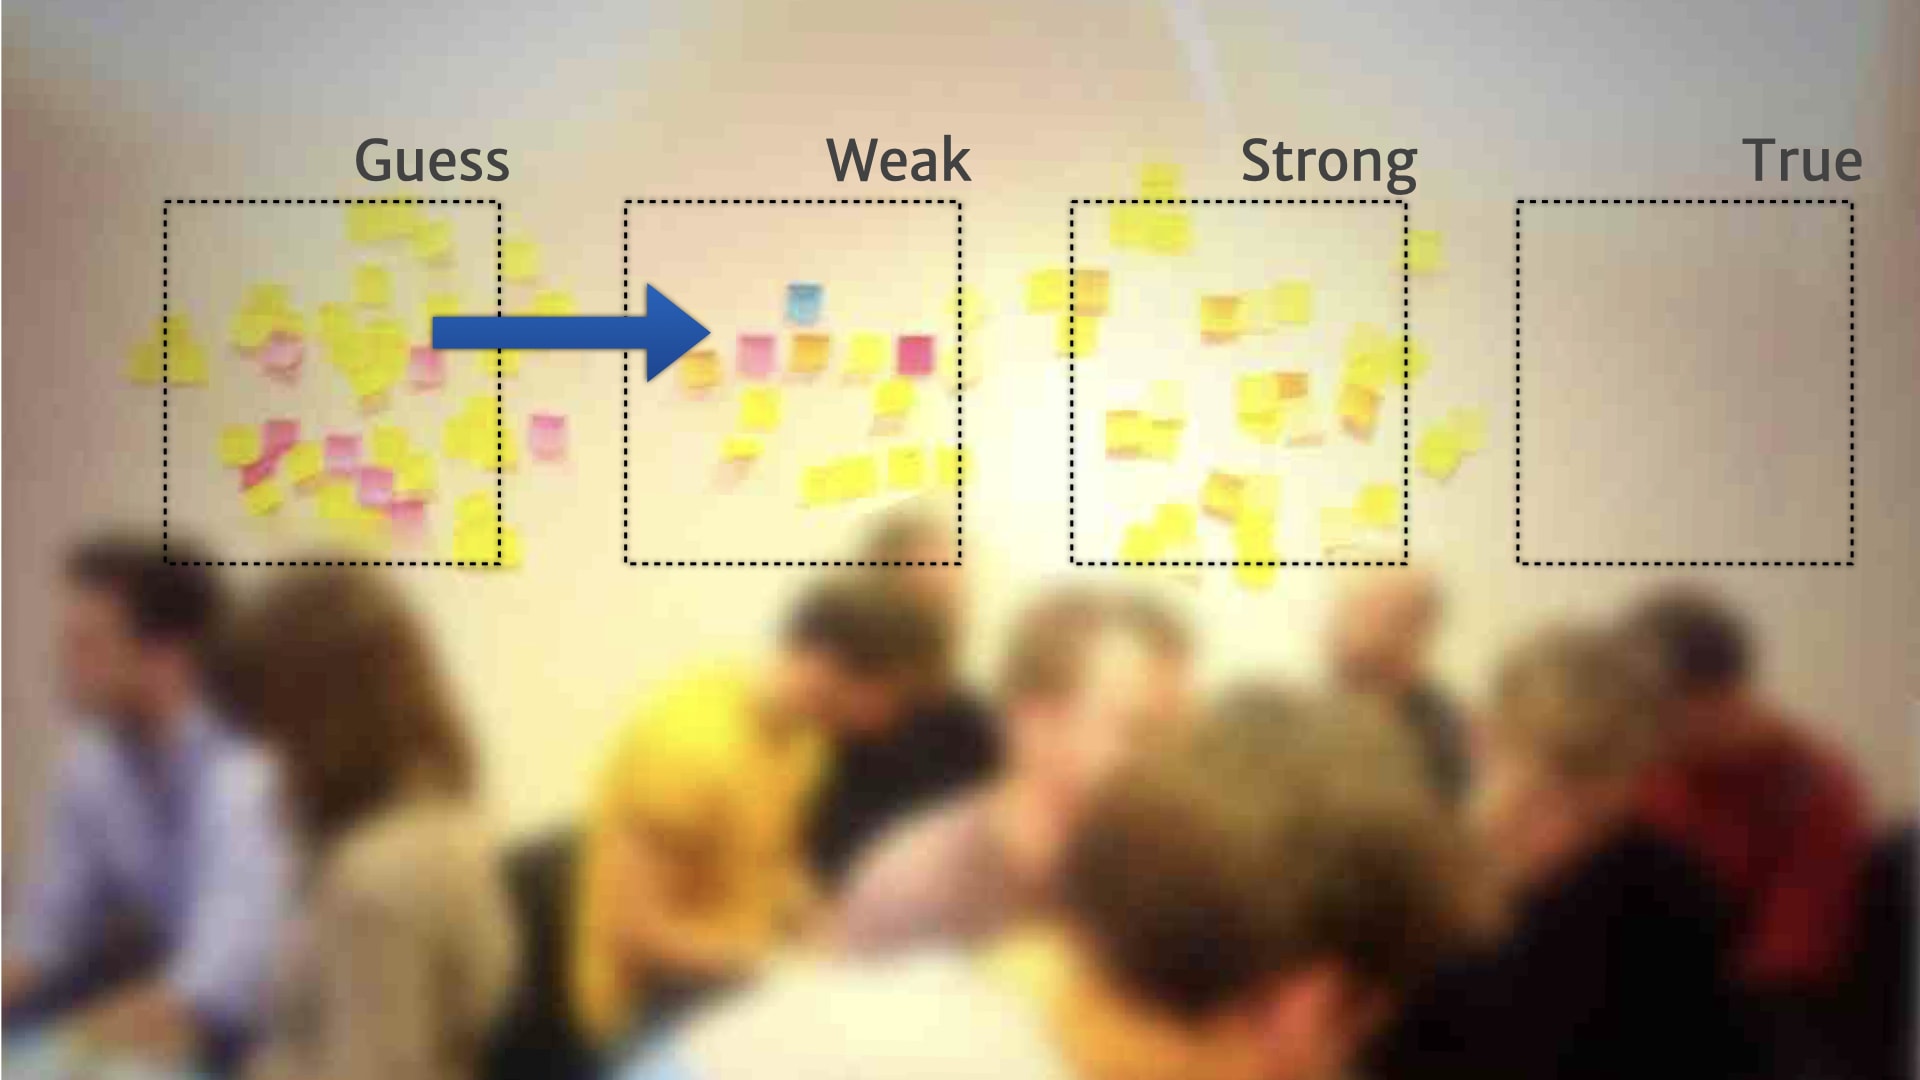 A picture of a wall of post-it notes divided into four categories running left to right (Guess, Weak, Strong, and True). A blue arrow shows a transition from Guess to Weak.